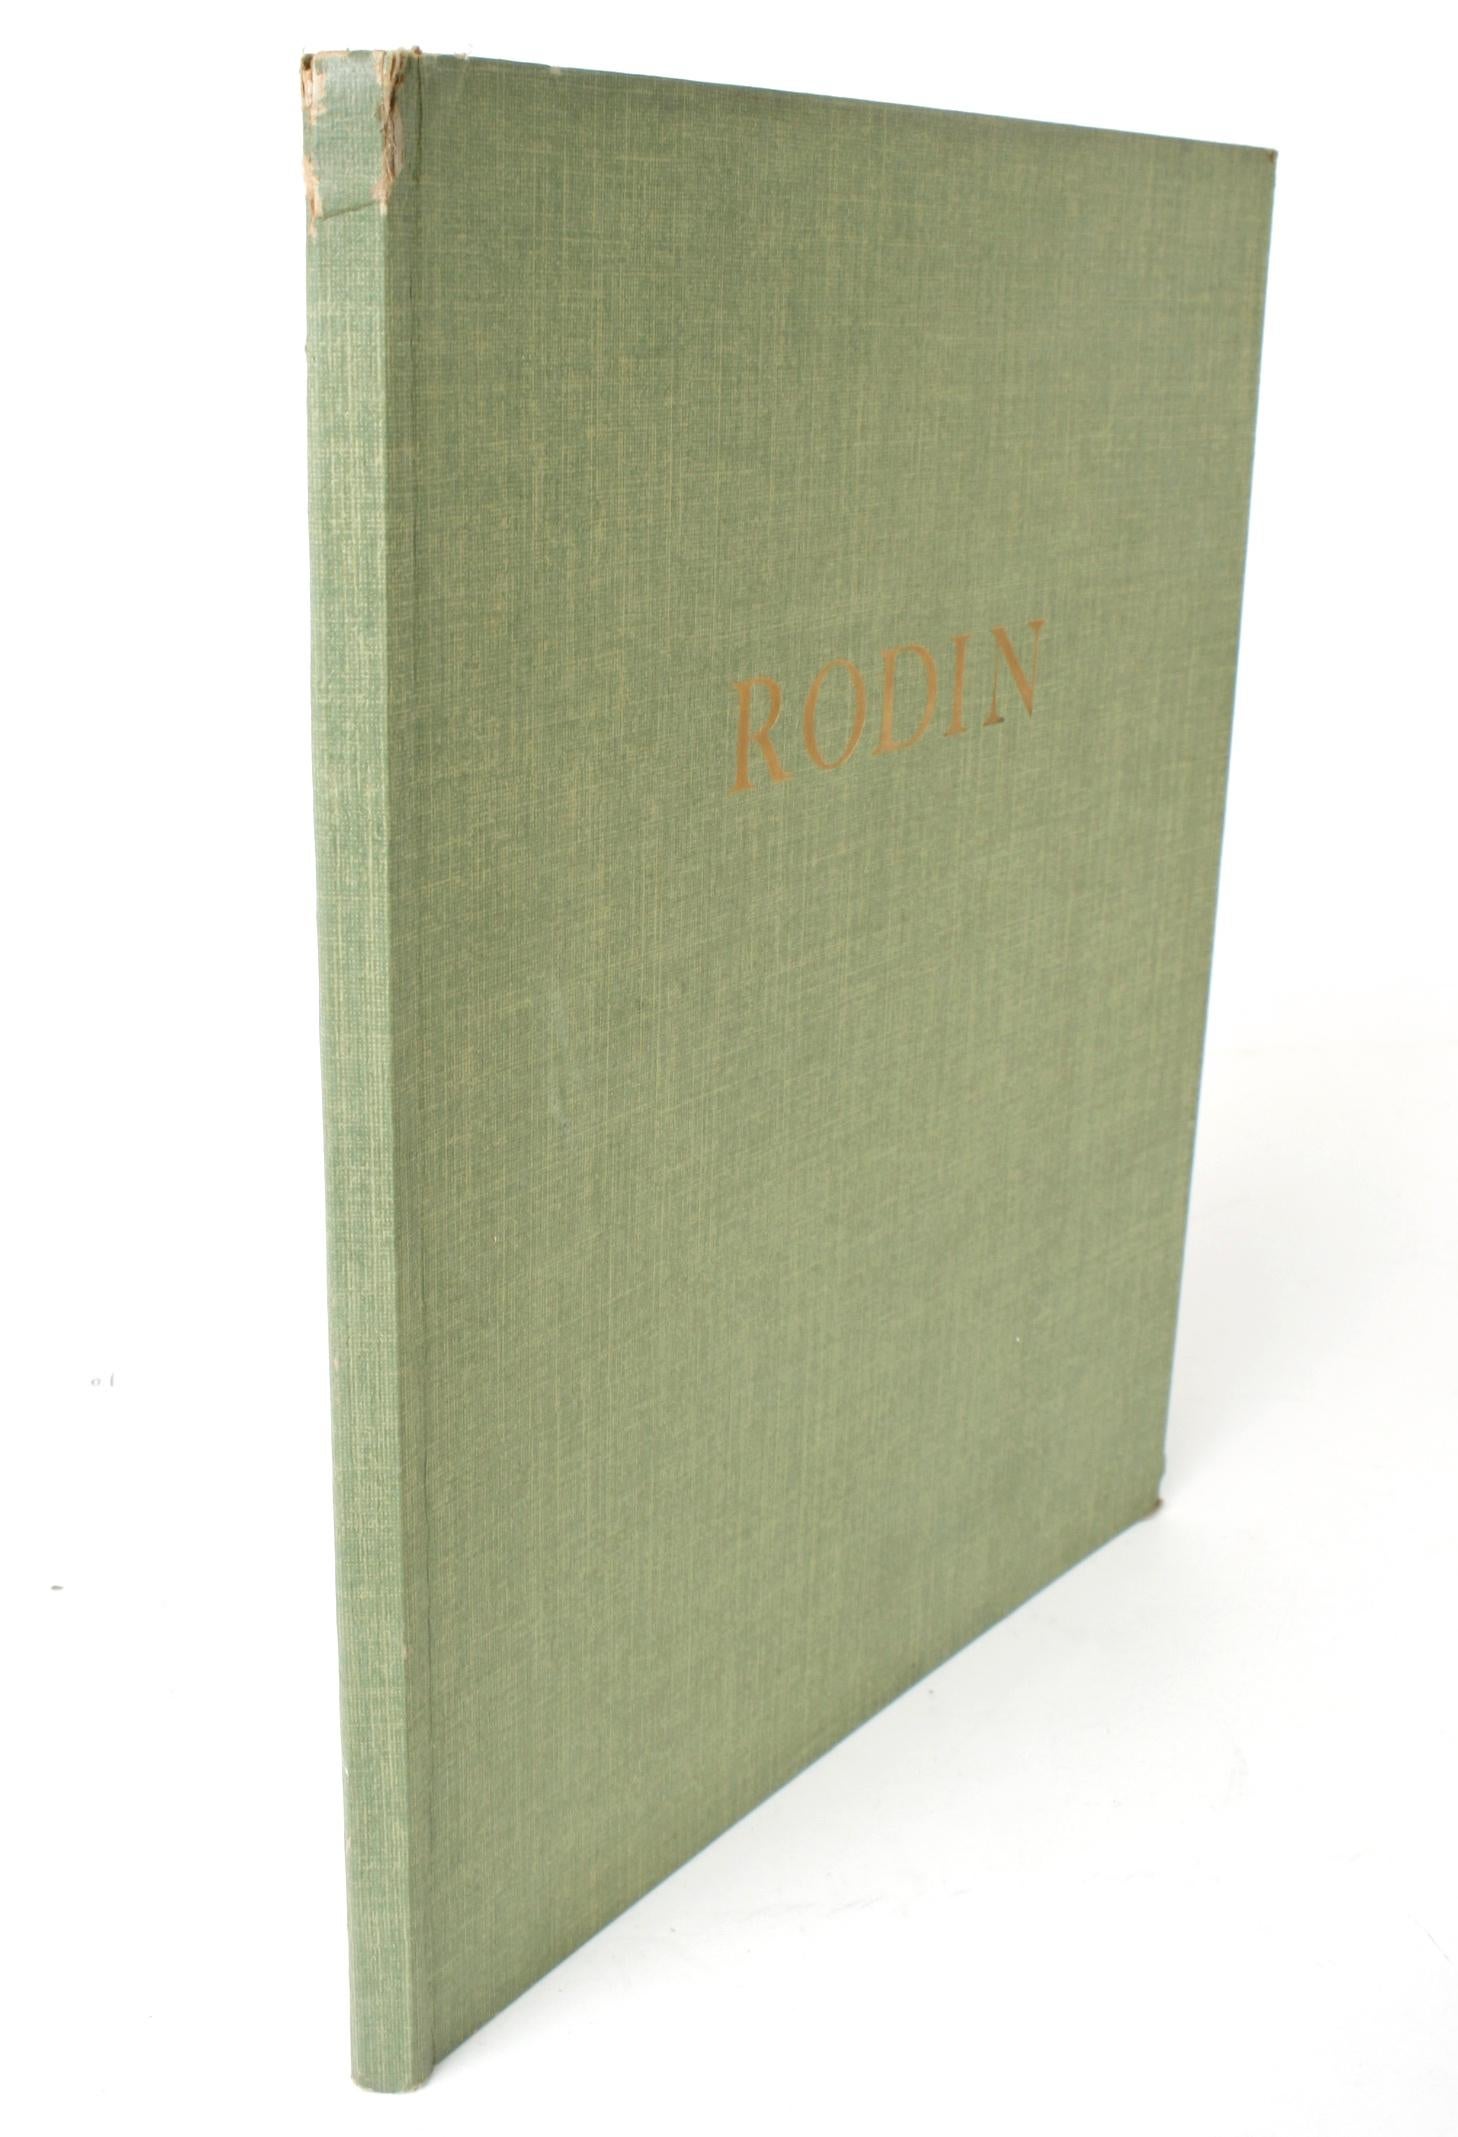 Auguste Rodin by Philip R Adams, First Edition 11